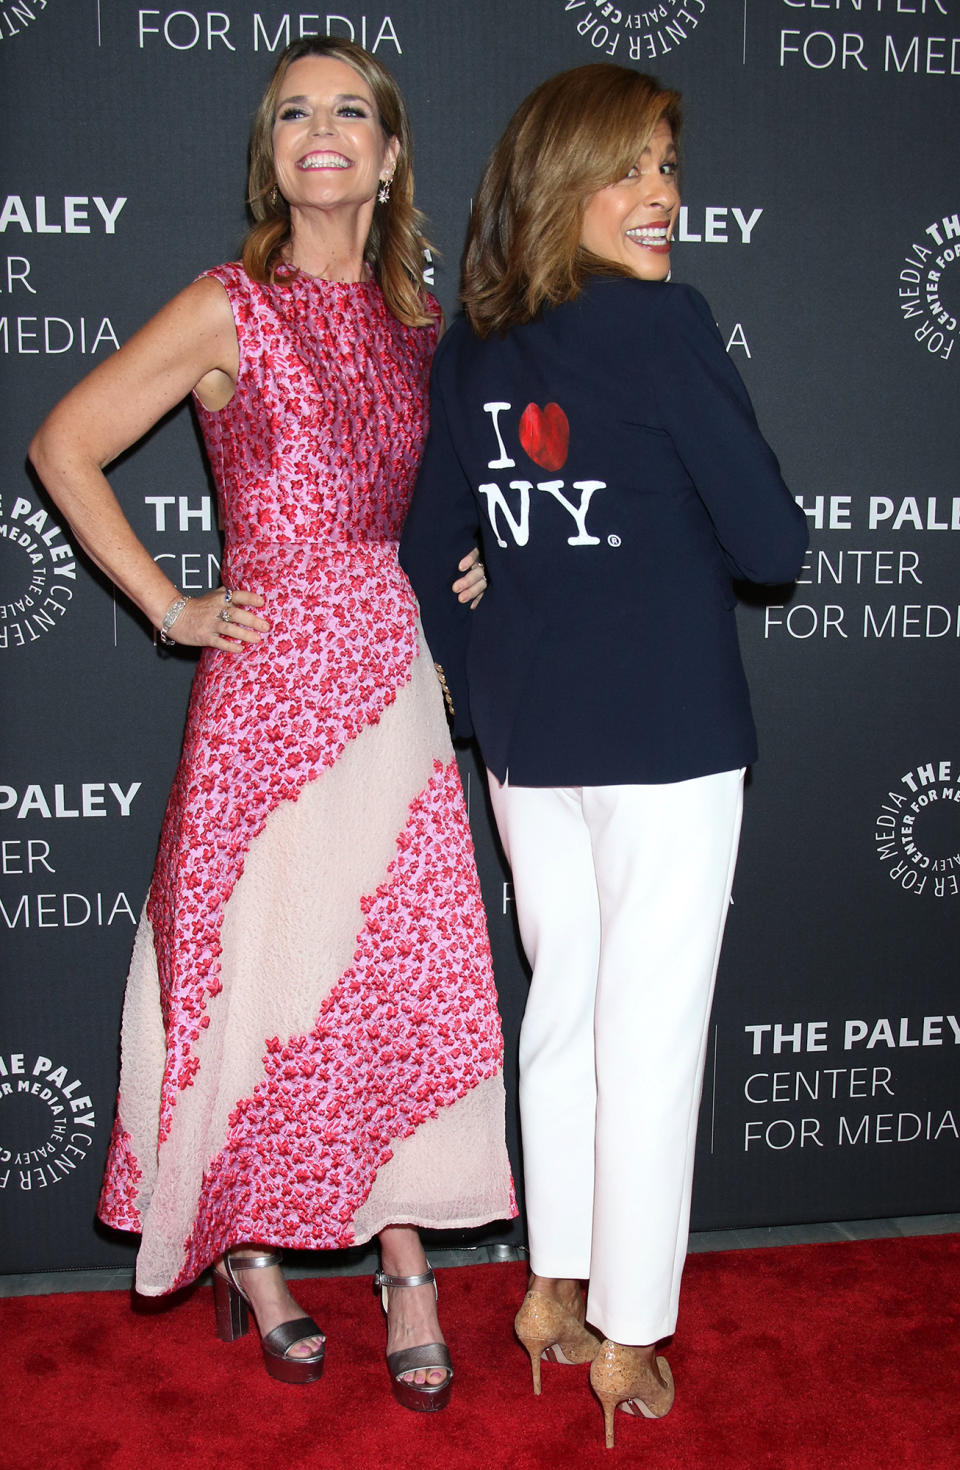 <p>Savannah Guthrie and Hoda Kotb of NBC`s <em>Today</em> Show celebrate the program's 70th Anniversary at The Paley Center for Media in N.Y.C. on May 12.</p>